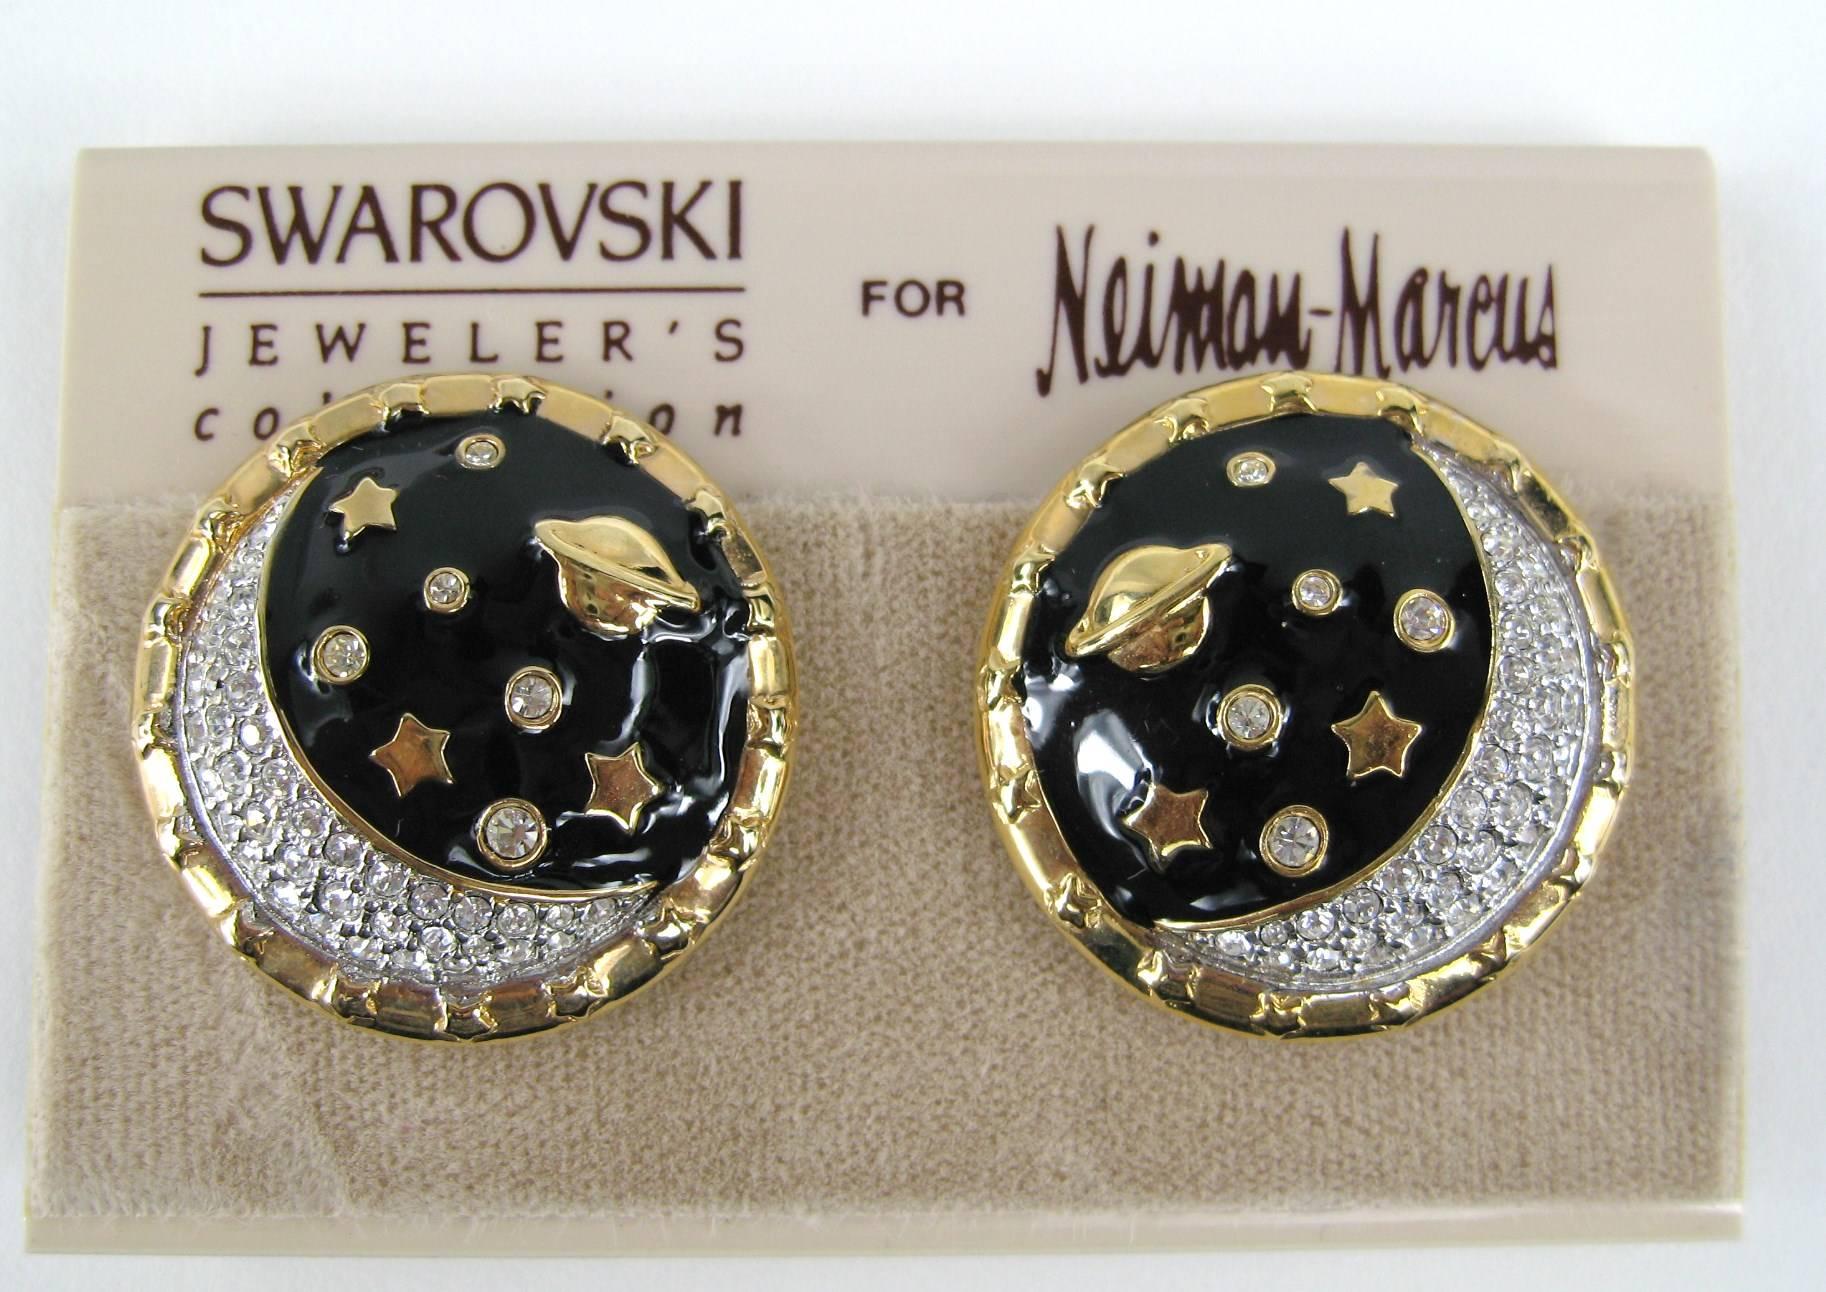 Swarovski Crystal Moon Earrings. Still on original  Neiman Marcus earring card. Measuring 1.15n in diameter. This is out of a massive collection of Hopi, Zuni, Navajo, Southwestern, sterling silver, costume jewelry and fine jewelry from one